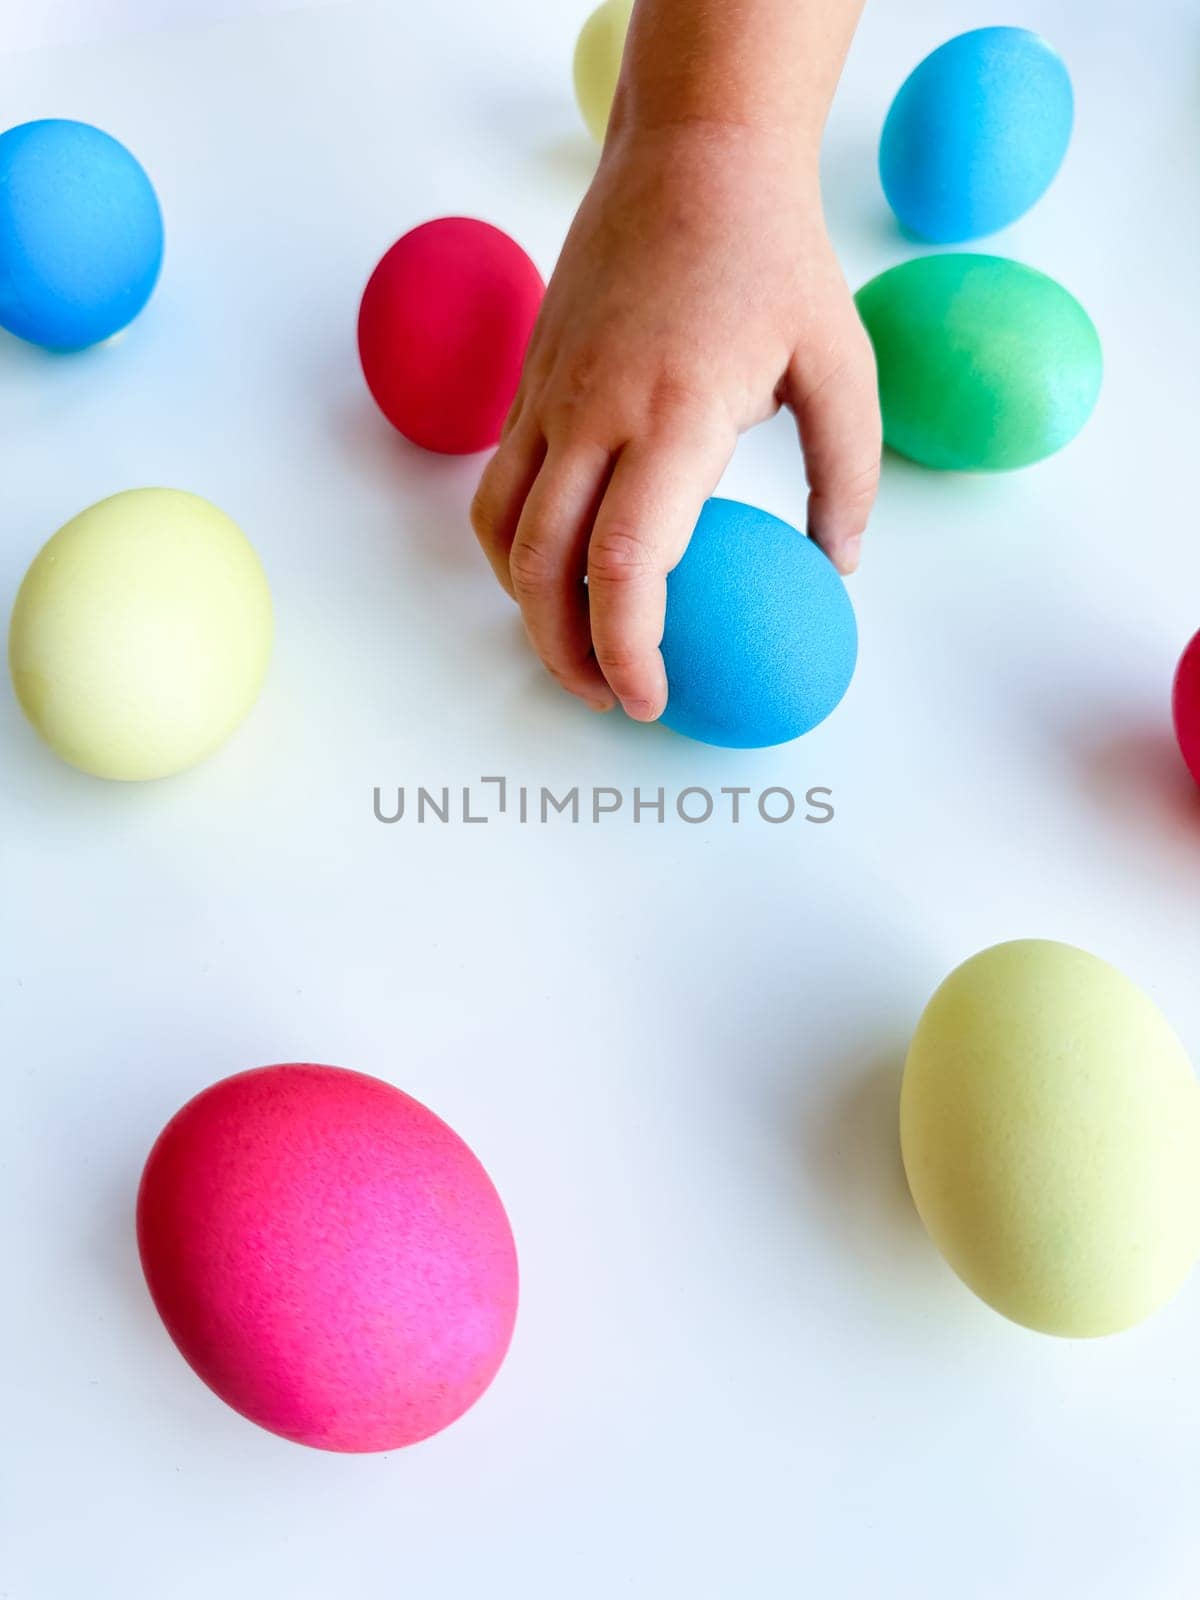 Child's hand picking up a blue Easter egg among colorful eggs on a white surface, interactive and engaging holiday activity concept. Can be used for educational content highlighting fine motor skills development in children, Easter egg hunt event promotions, family friendly activity ideas. by Lunnica